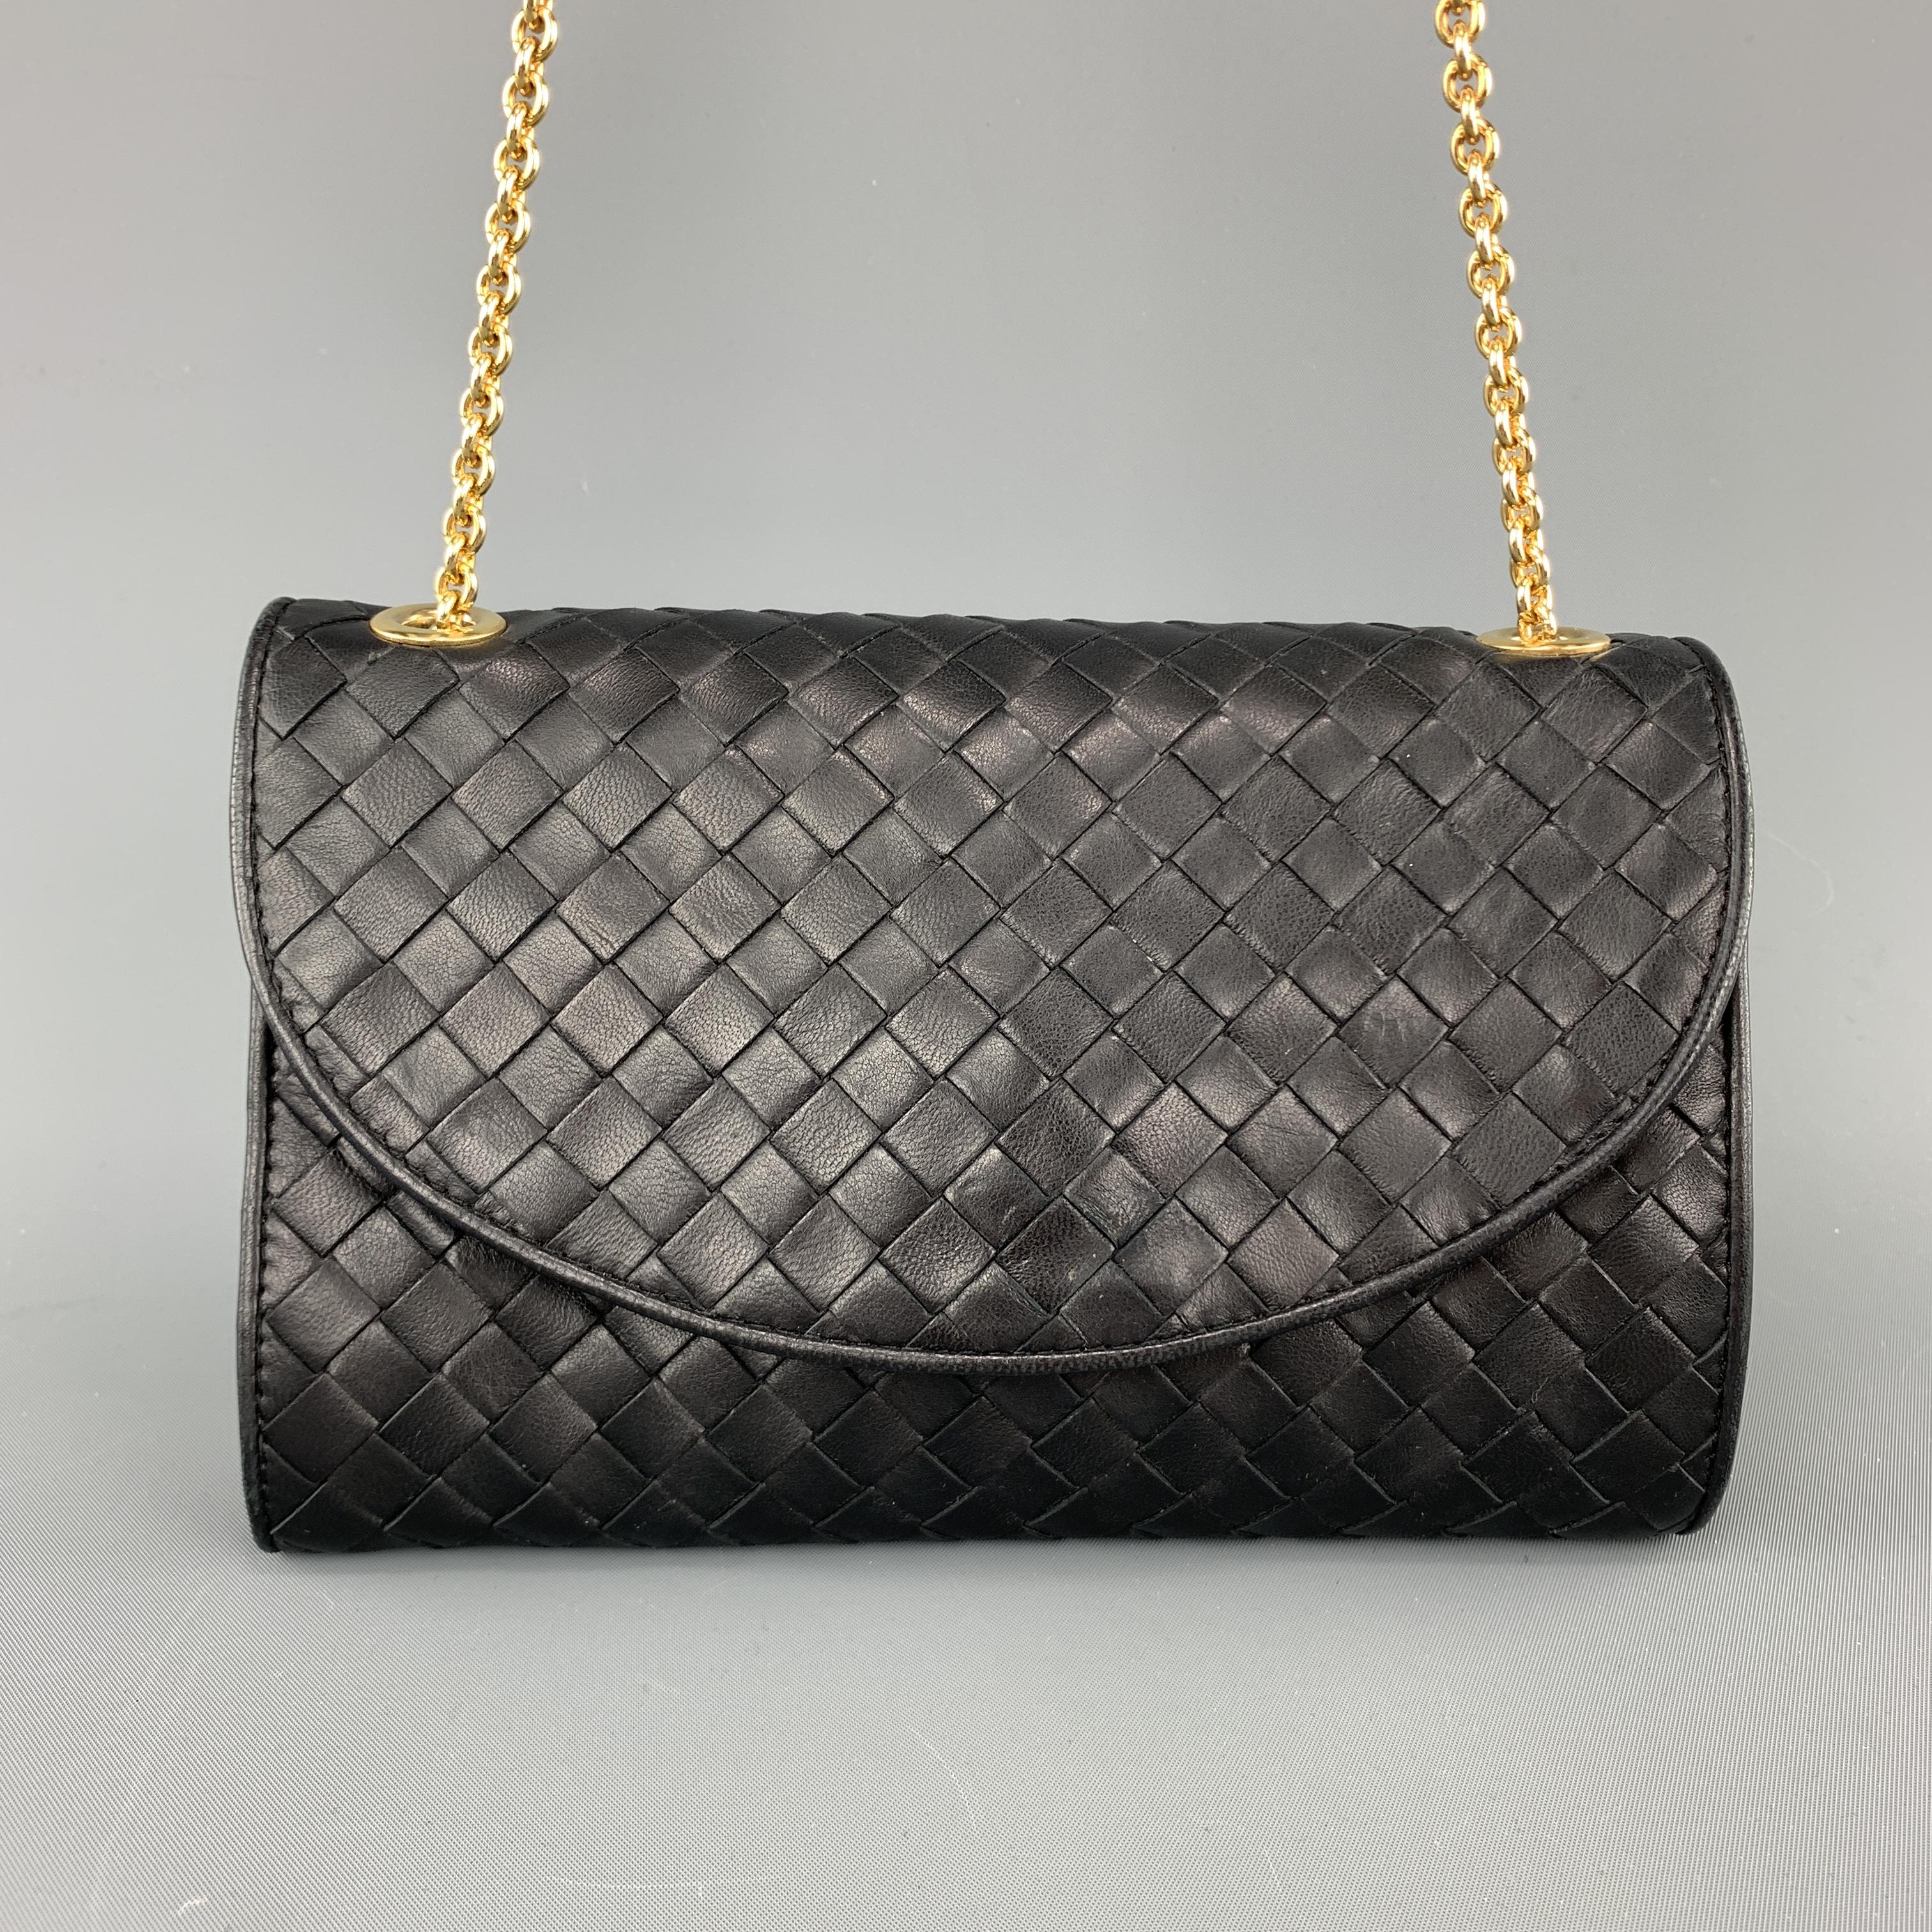 Vintage BOTTEGA VENETA bag comes in black woven intrecciato leather with a flap snap closure, Gold tone chain strap, and beige interior. Lining in poor condition. As-is. Made in Italy.

Good Pre-Owned Condition.

Measurements:

Length: 7.75